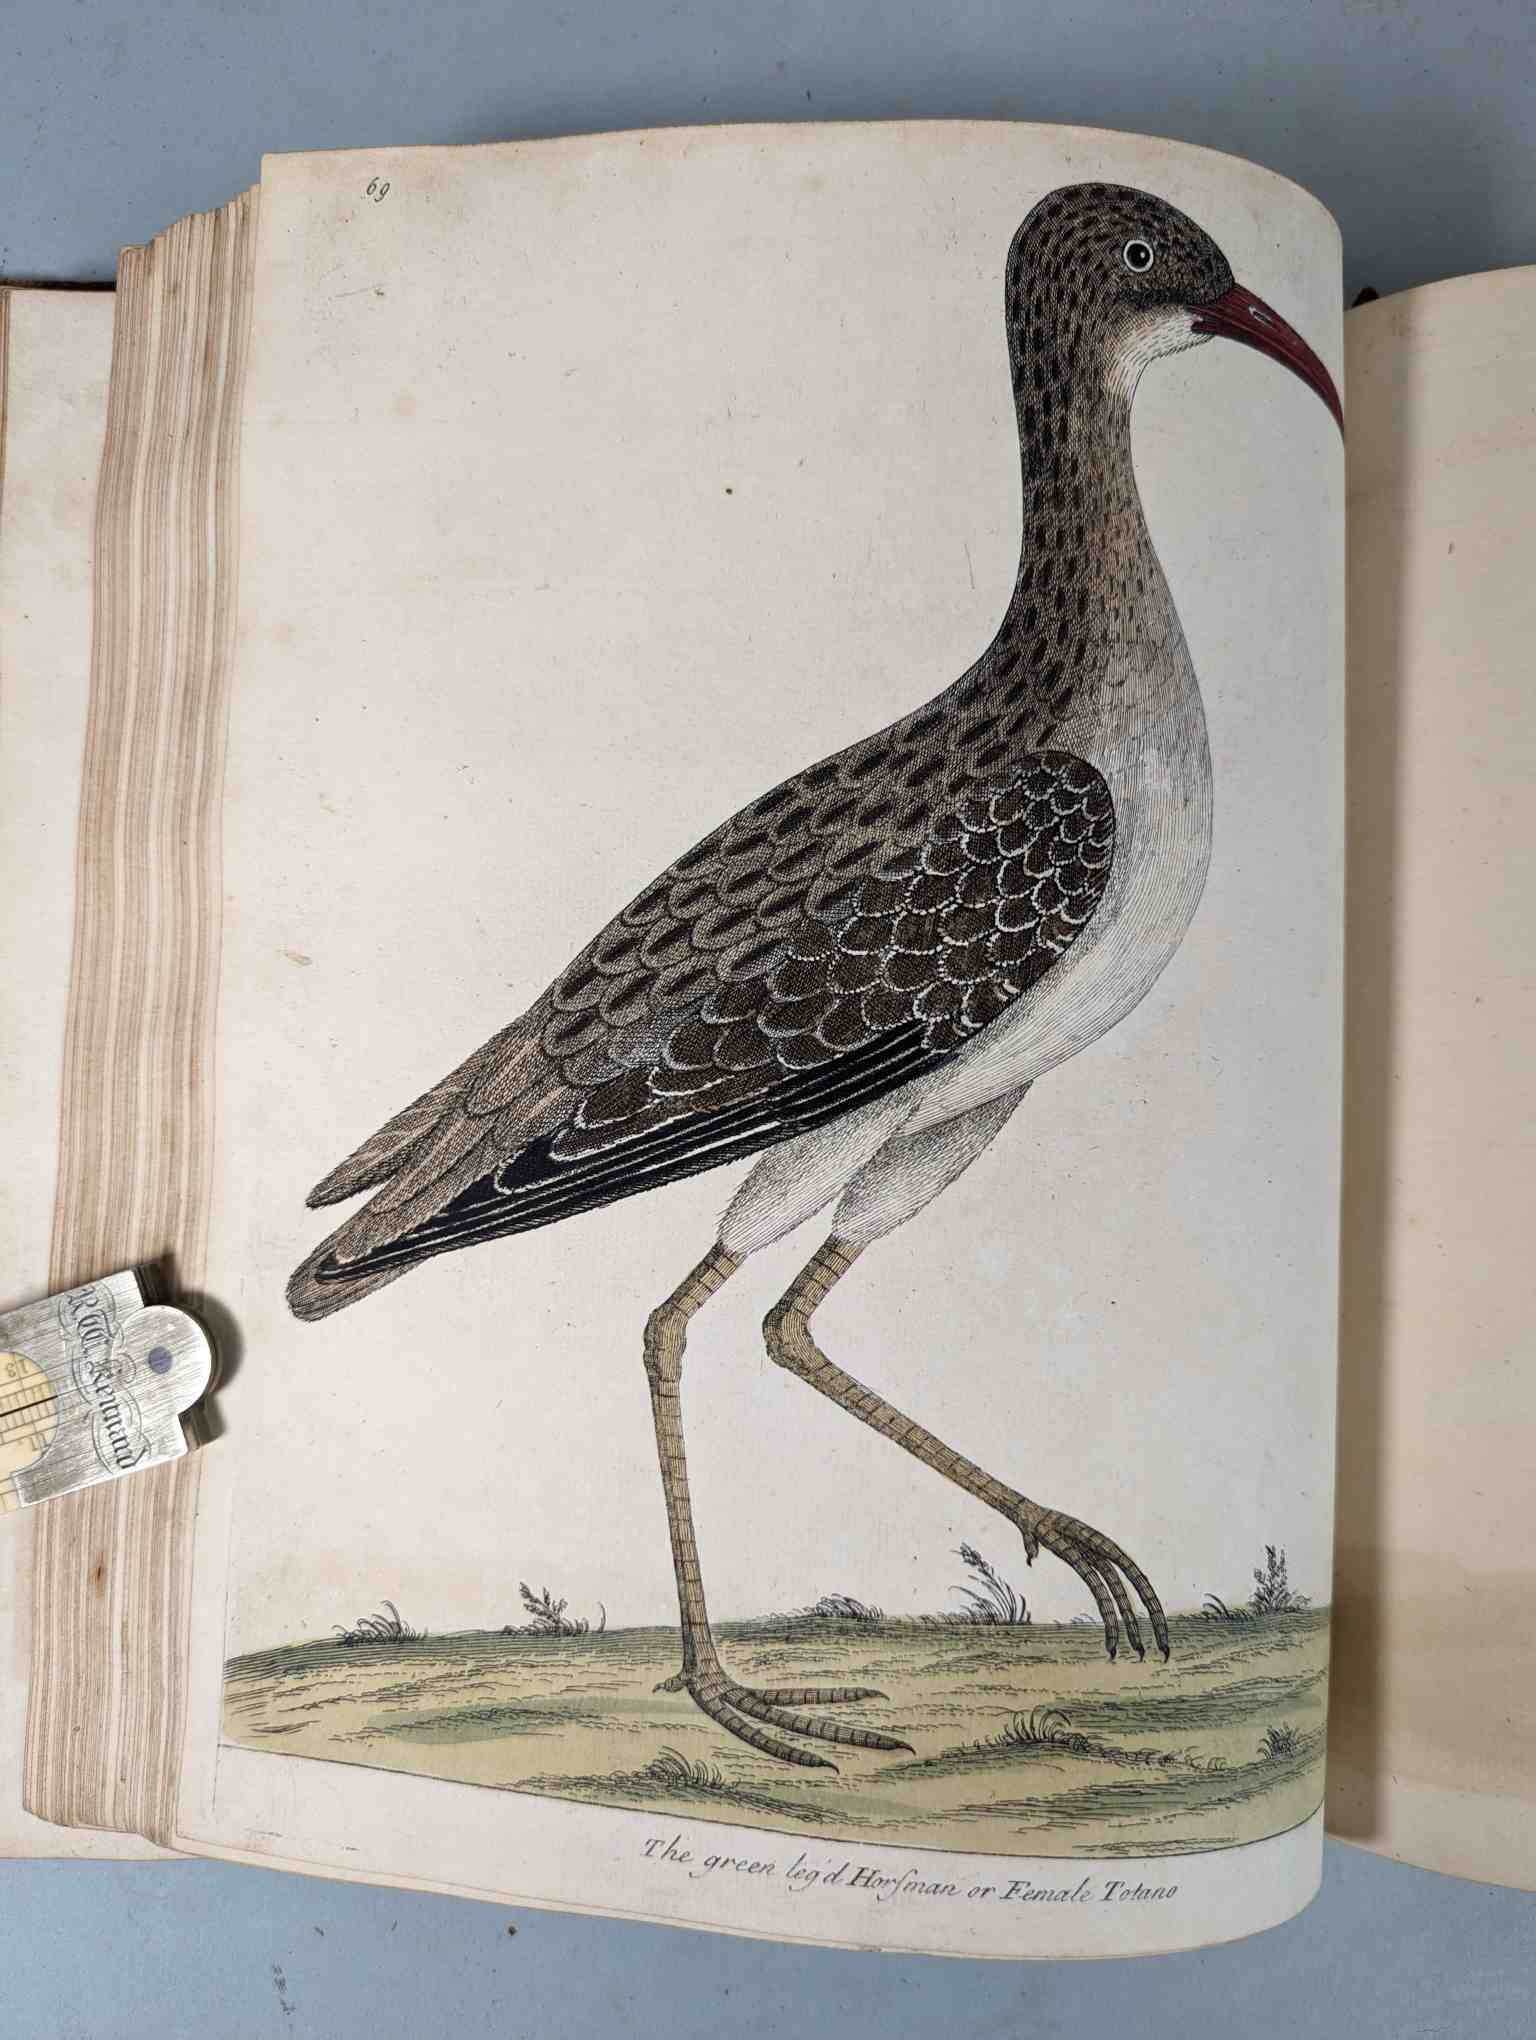 ALBIN, Eleazar. A Natural History of Birds, to which are added, Notes and Observations by W. - Image 172 of 208